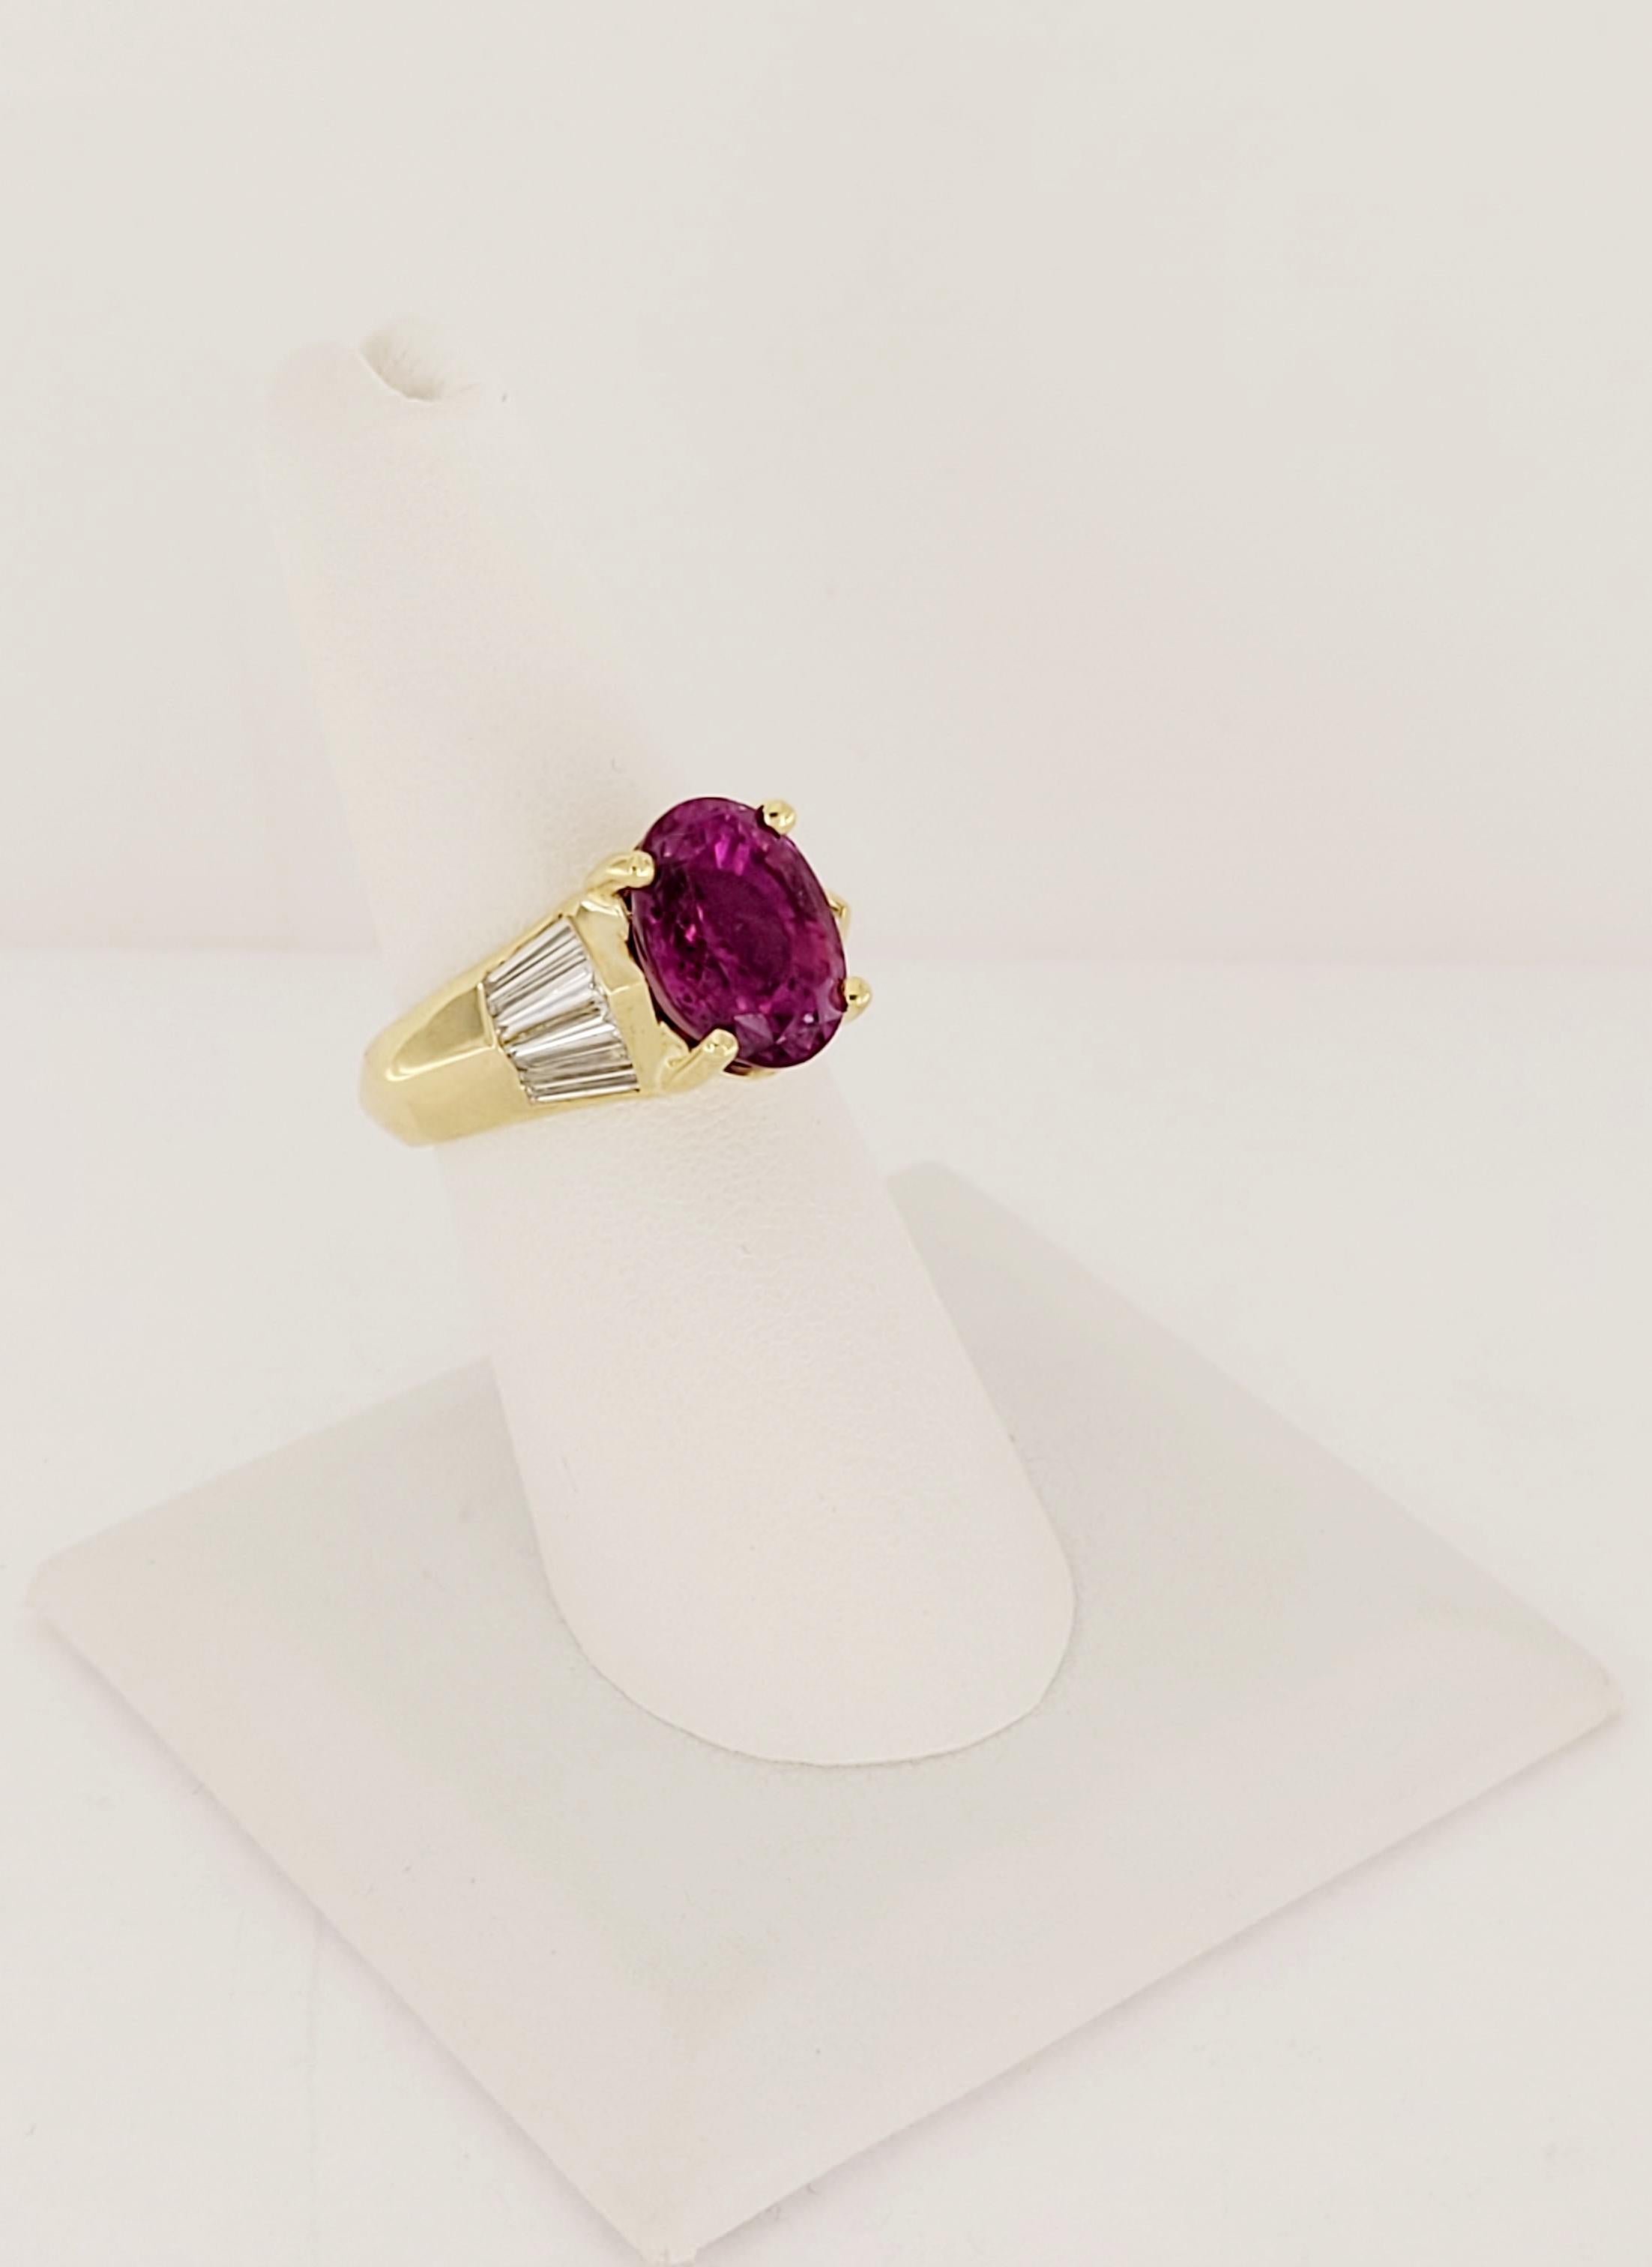 Hand Made ring with diamonds
18K Yellow Gold 
Gender Women
Condition New 
Ring Size 7
Main Stone Pink Sapphire 
Sapphire 6.82cts 
Diamonds 2.75ct
Clarity VVS
Color Grade E 
Weight 12.7gr
This ring is Resizable  
Retail Price $17,800